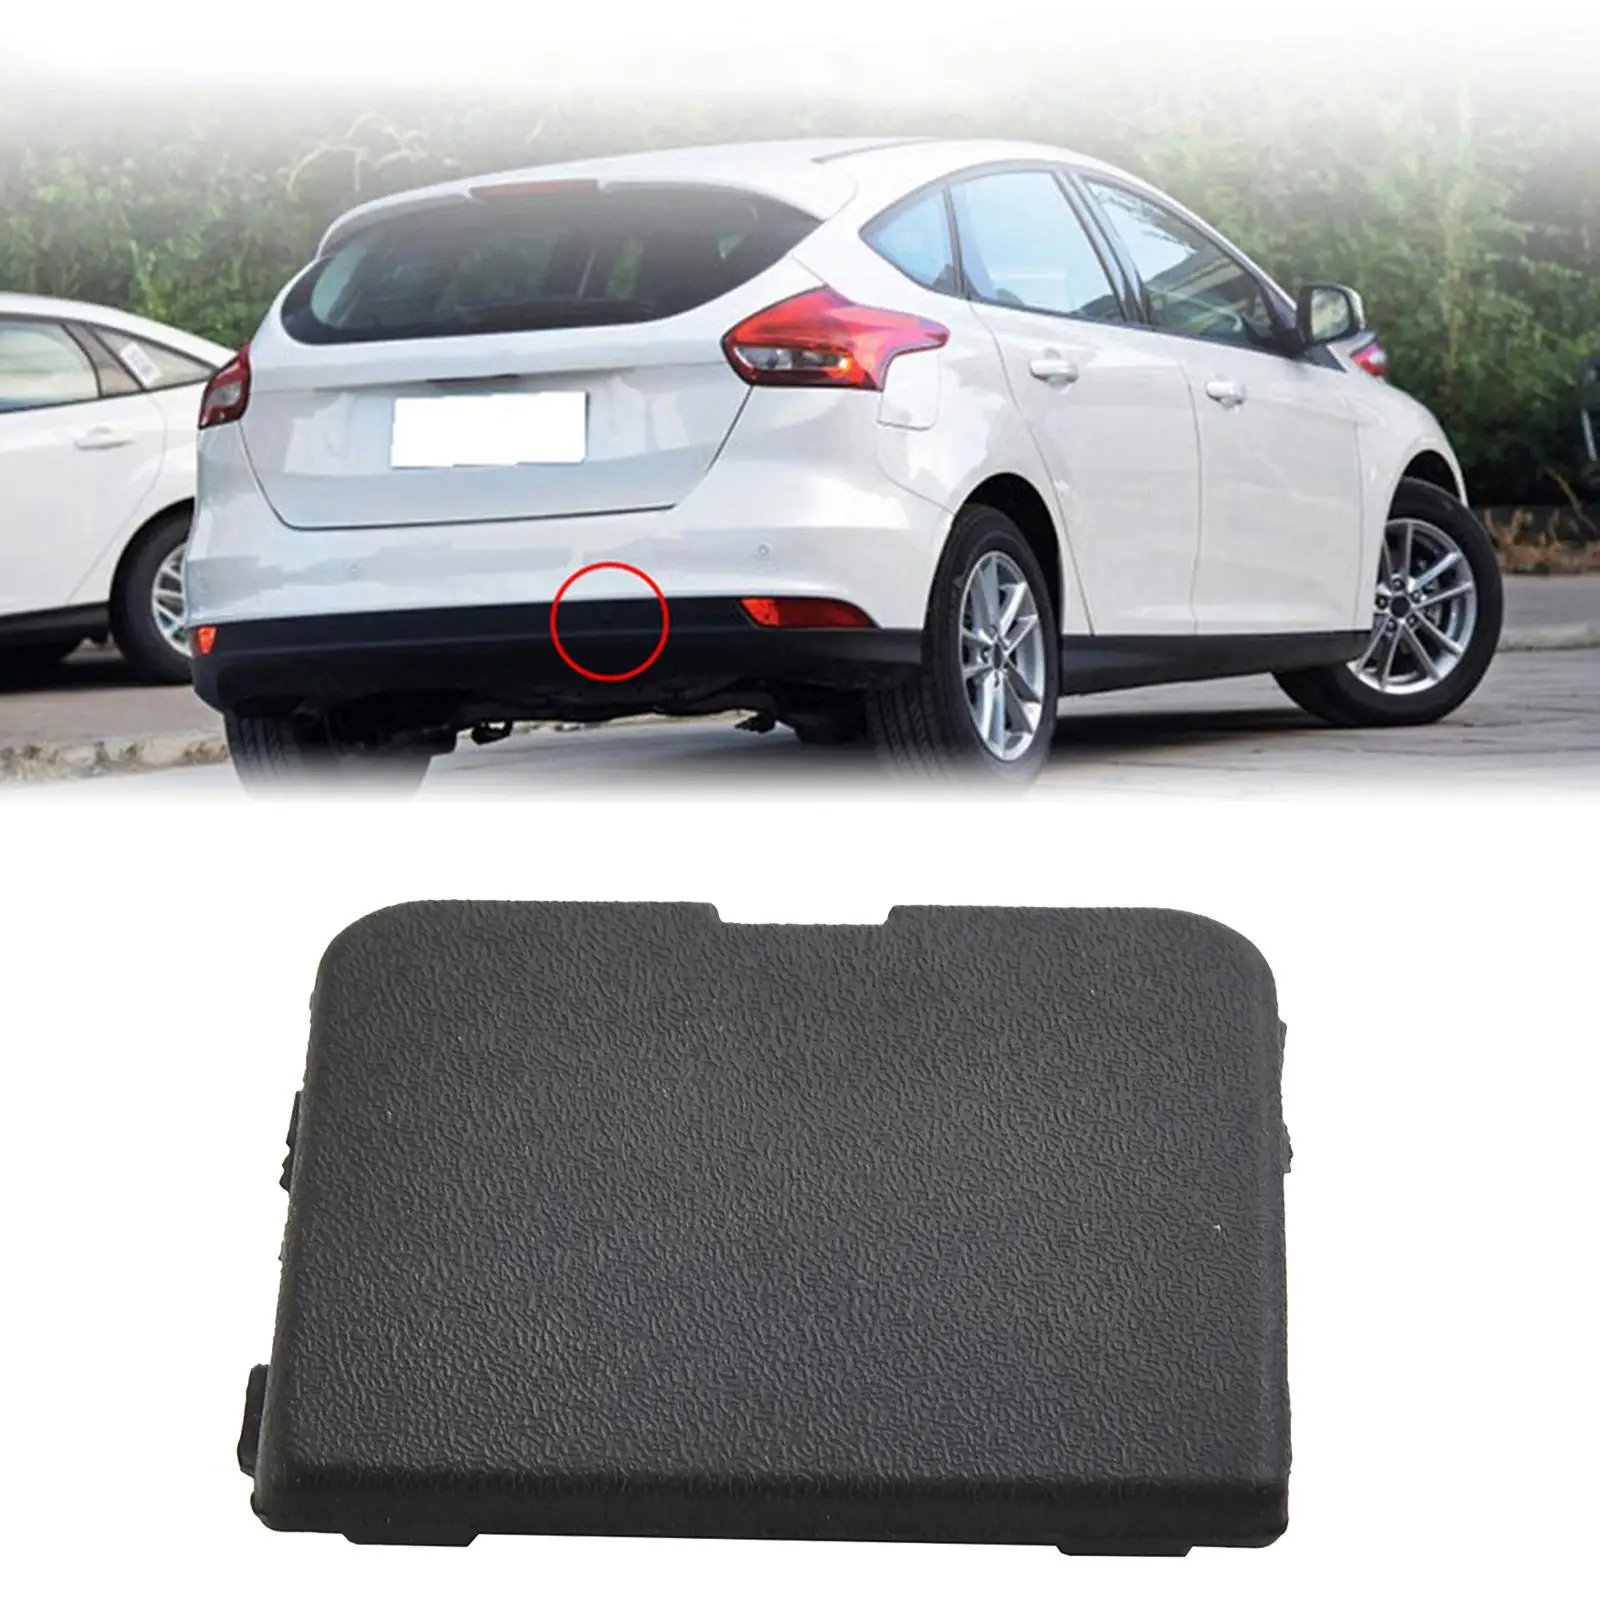 1872237 Car Accessories Premium Rear Bumper Tow Hook Cover Trailer Cover F1EB-17K922-ab for Ford Focus 2015-2018 Hatchback